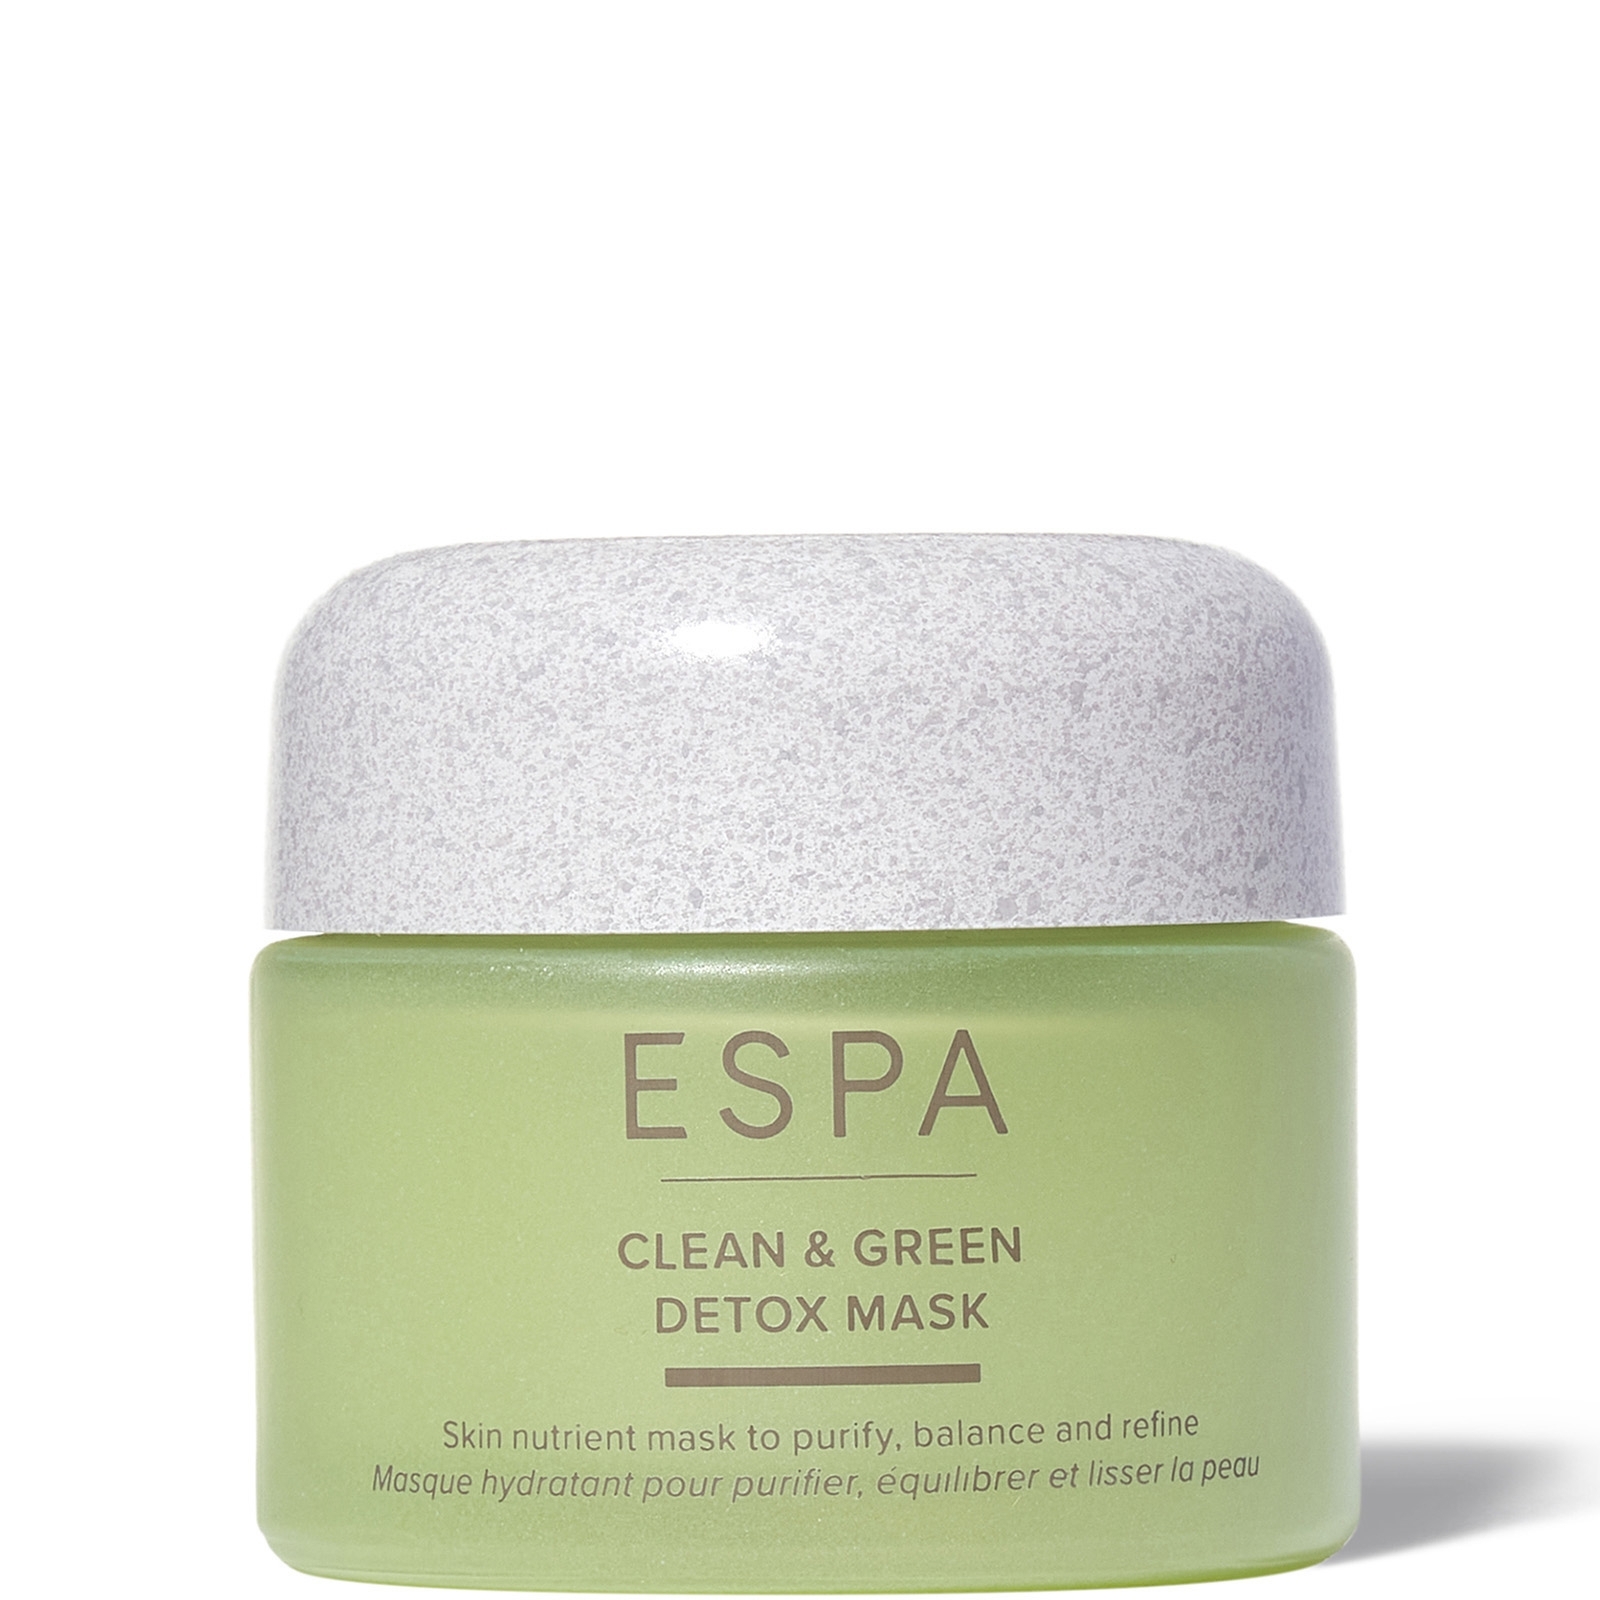 Image of ESPA Clean and Green Detox Mask 55ml